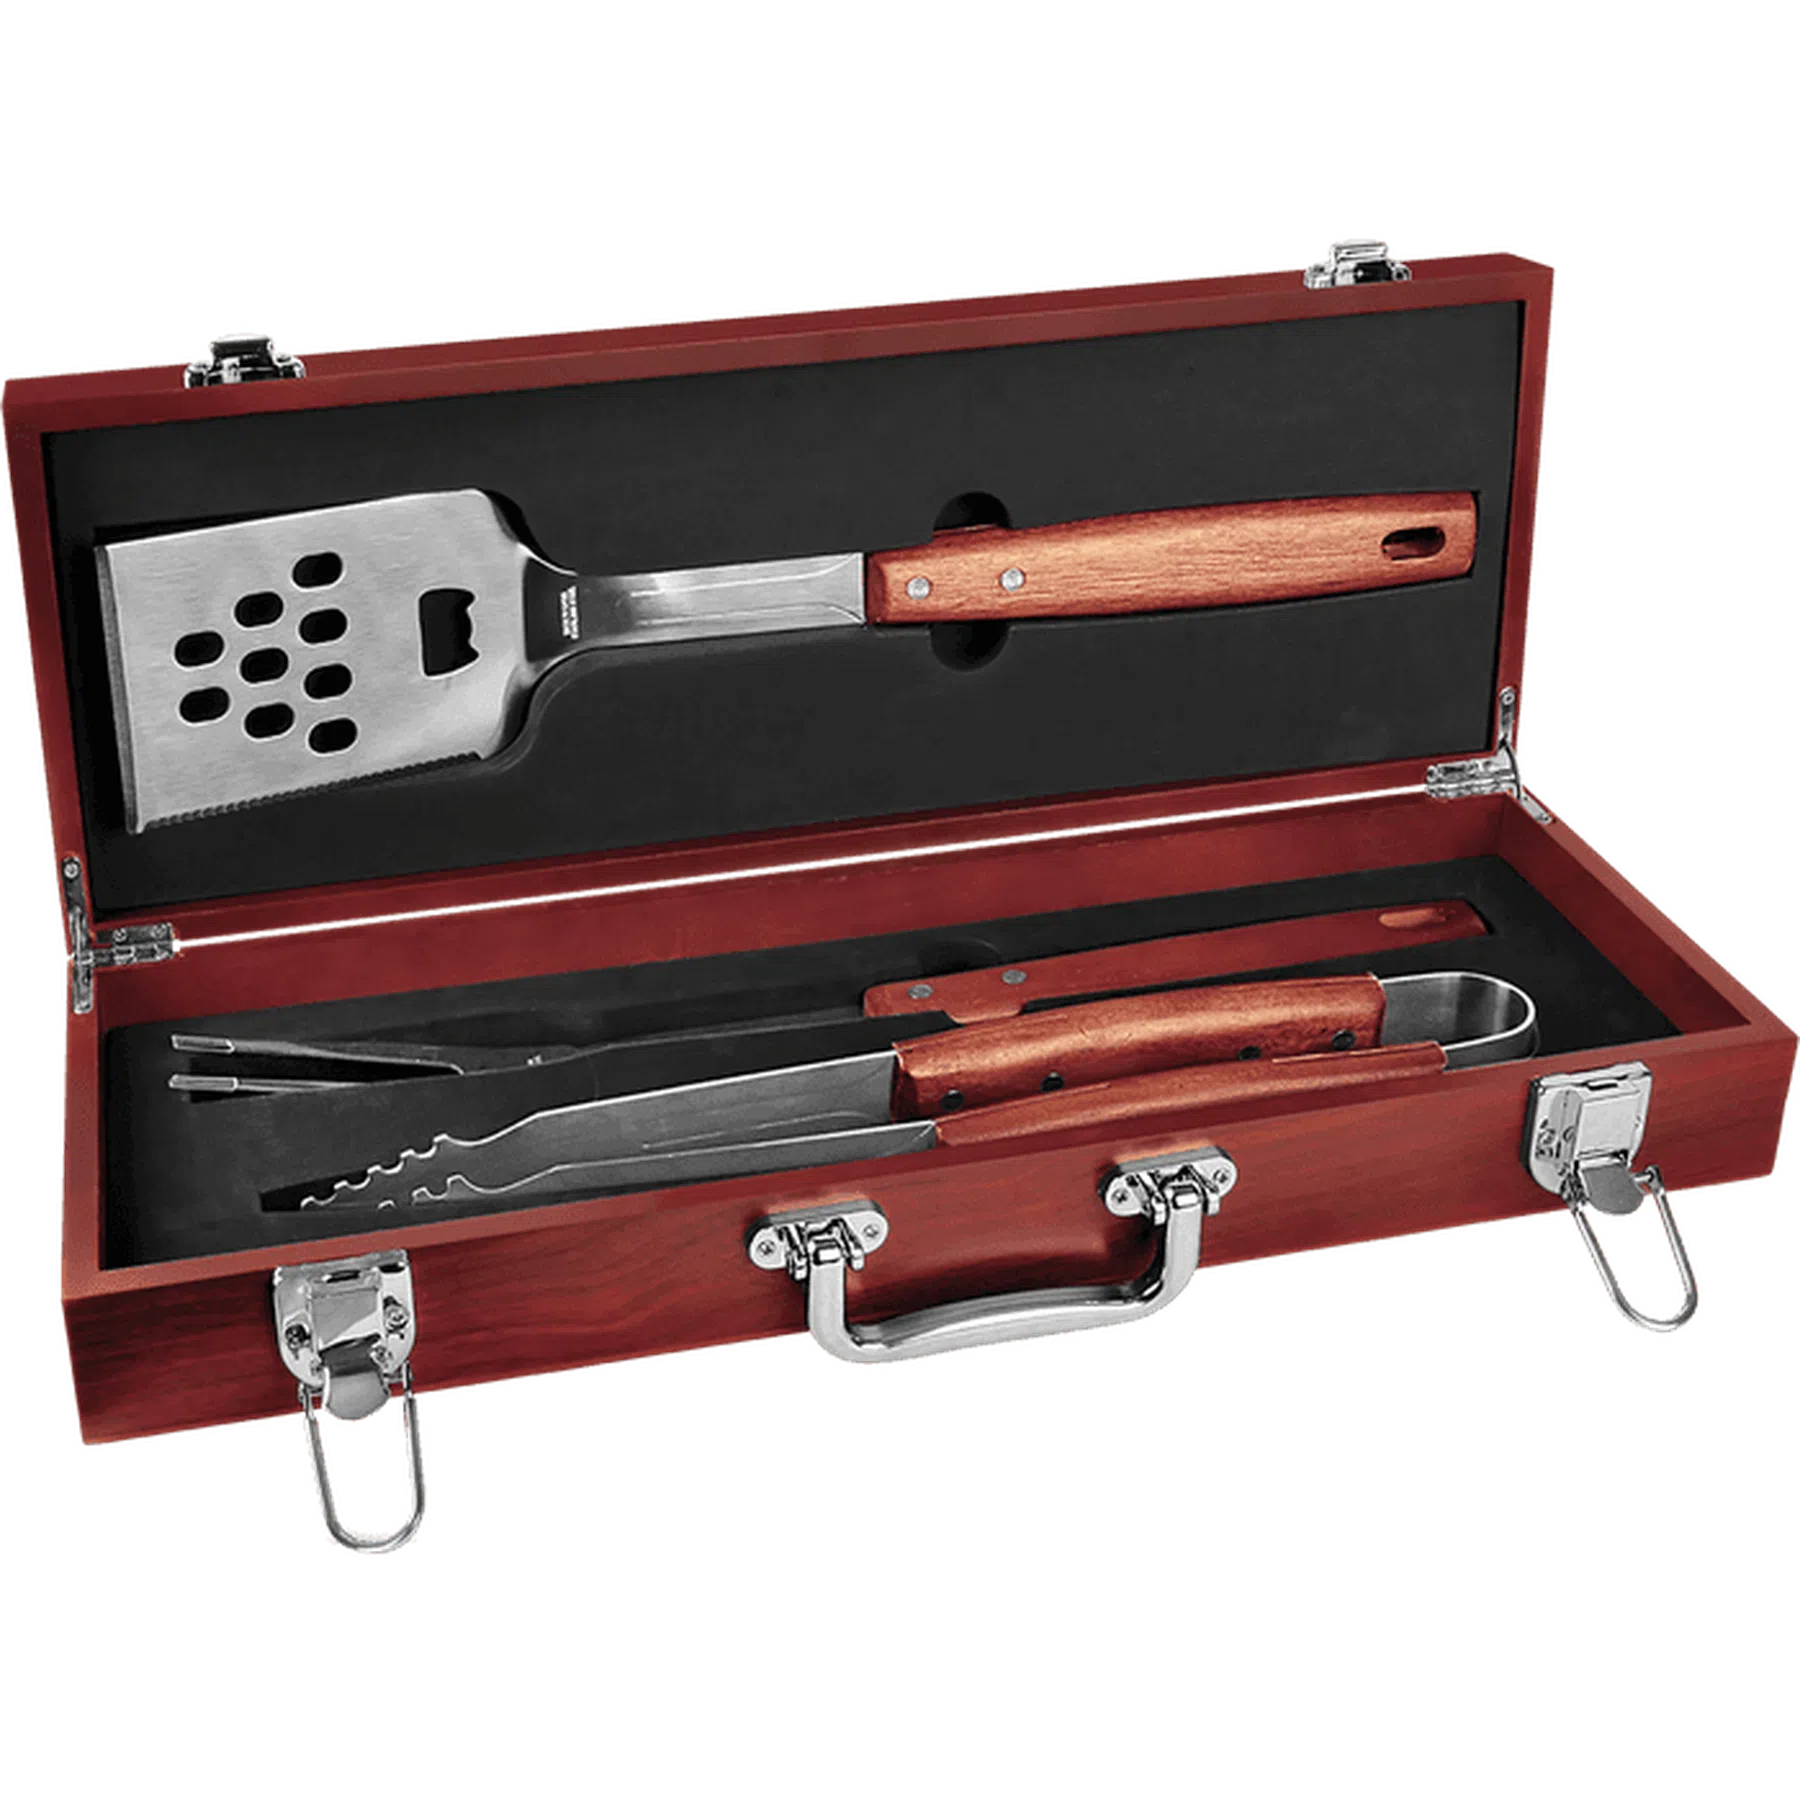 Three Piece Barbeque Set in Pine, Bamboo or Rosewood Case